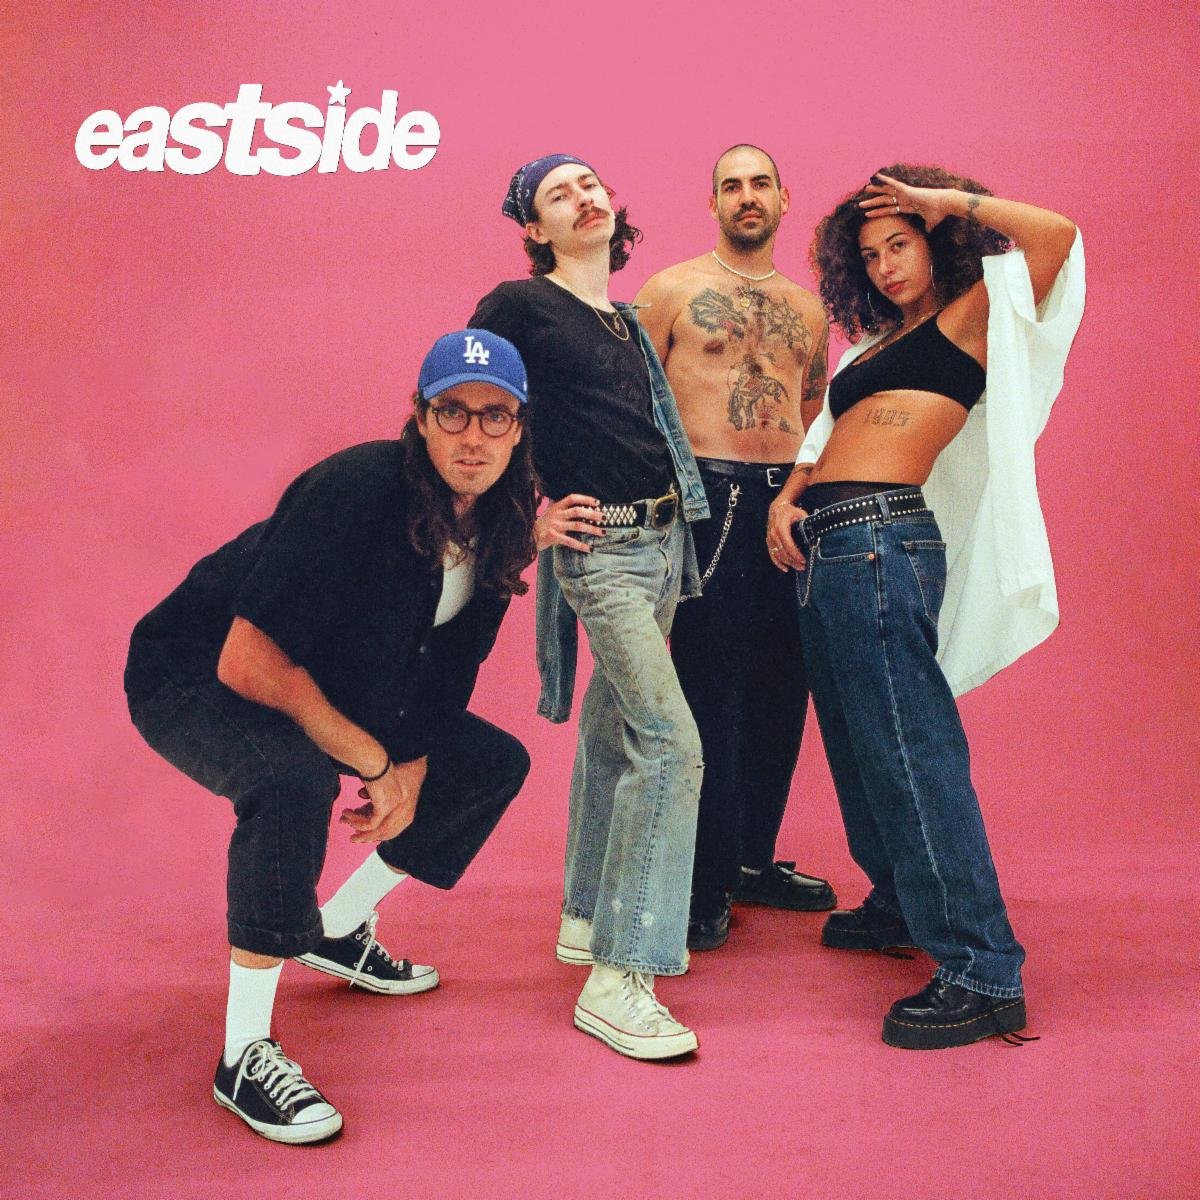 DAISY IS BACK  NEW SINGLE AND VIDEO FOR “EASTSIDE” - Revolt In Style